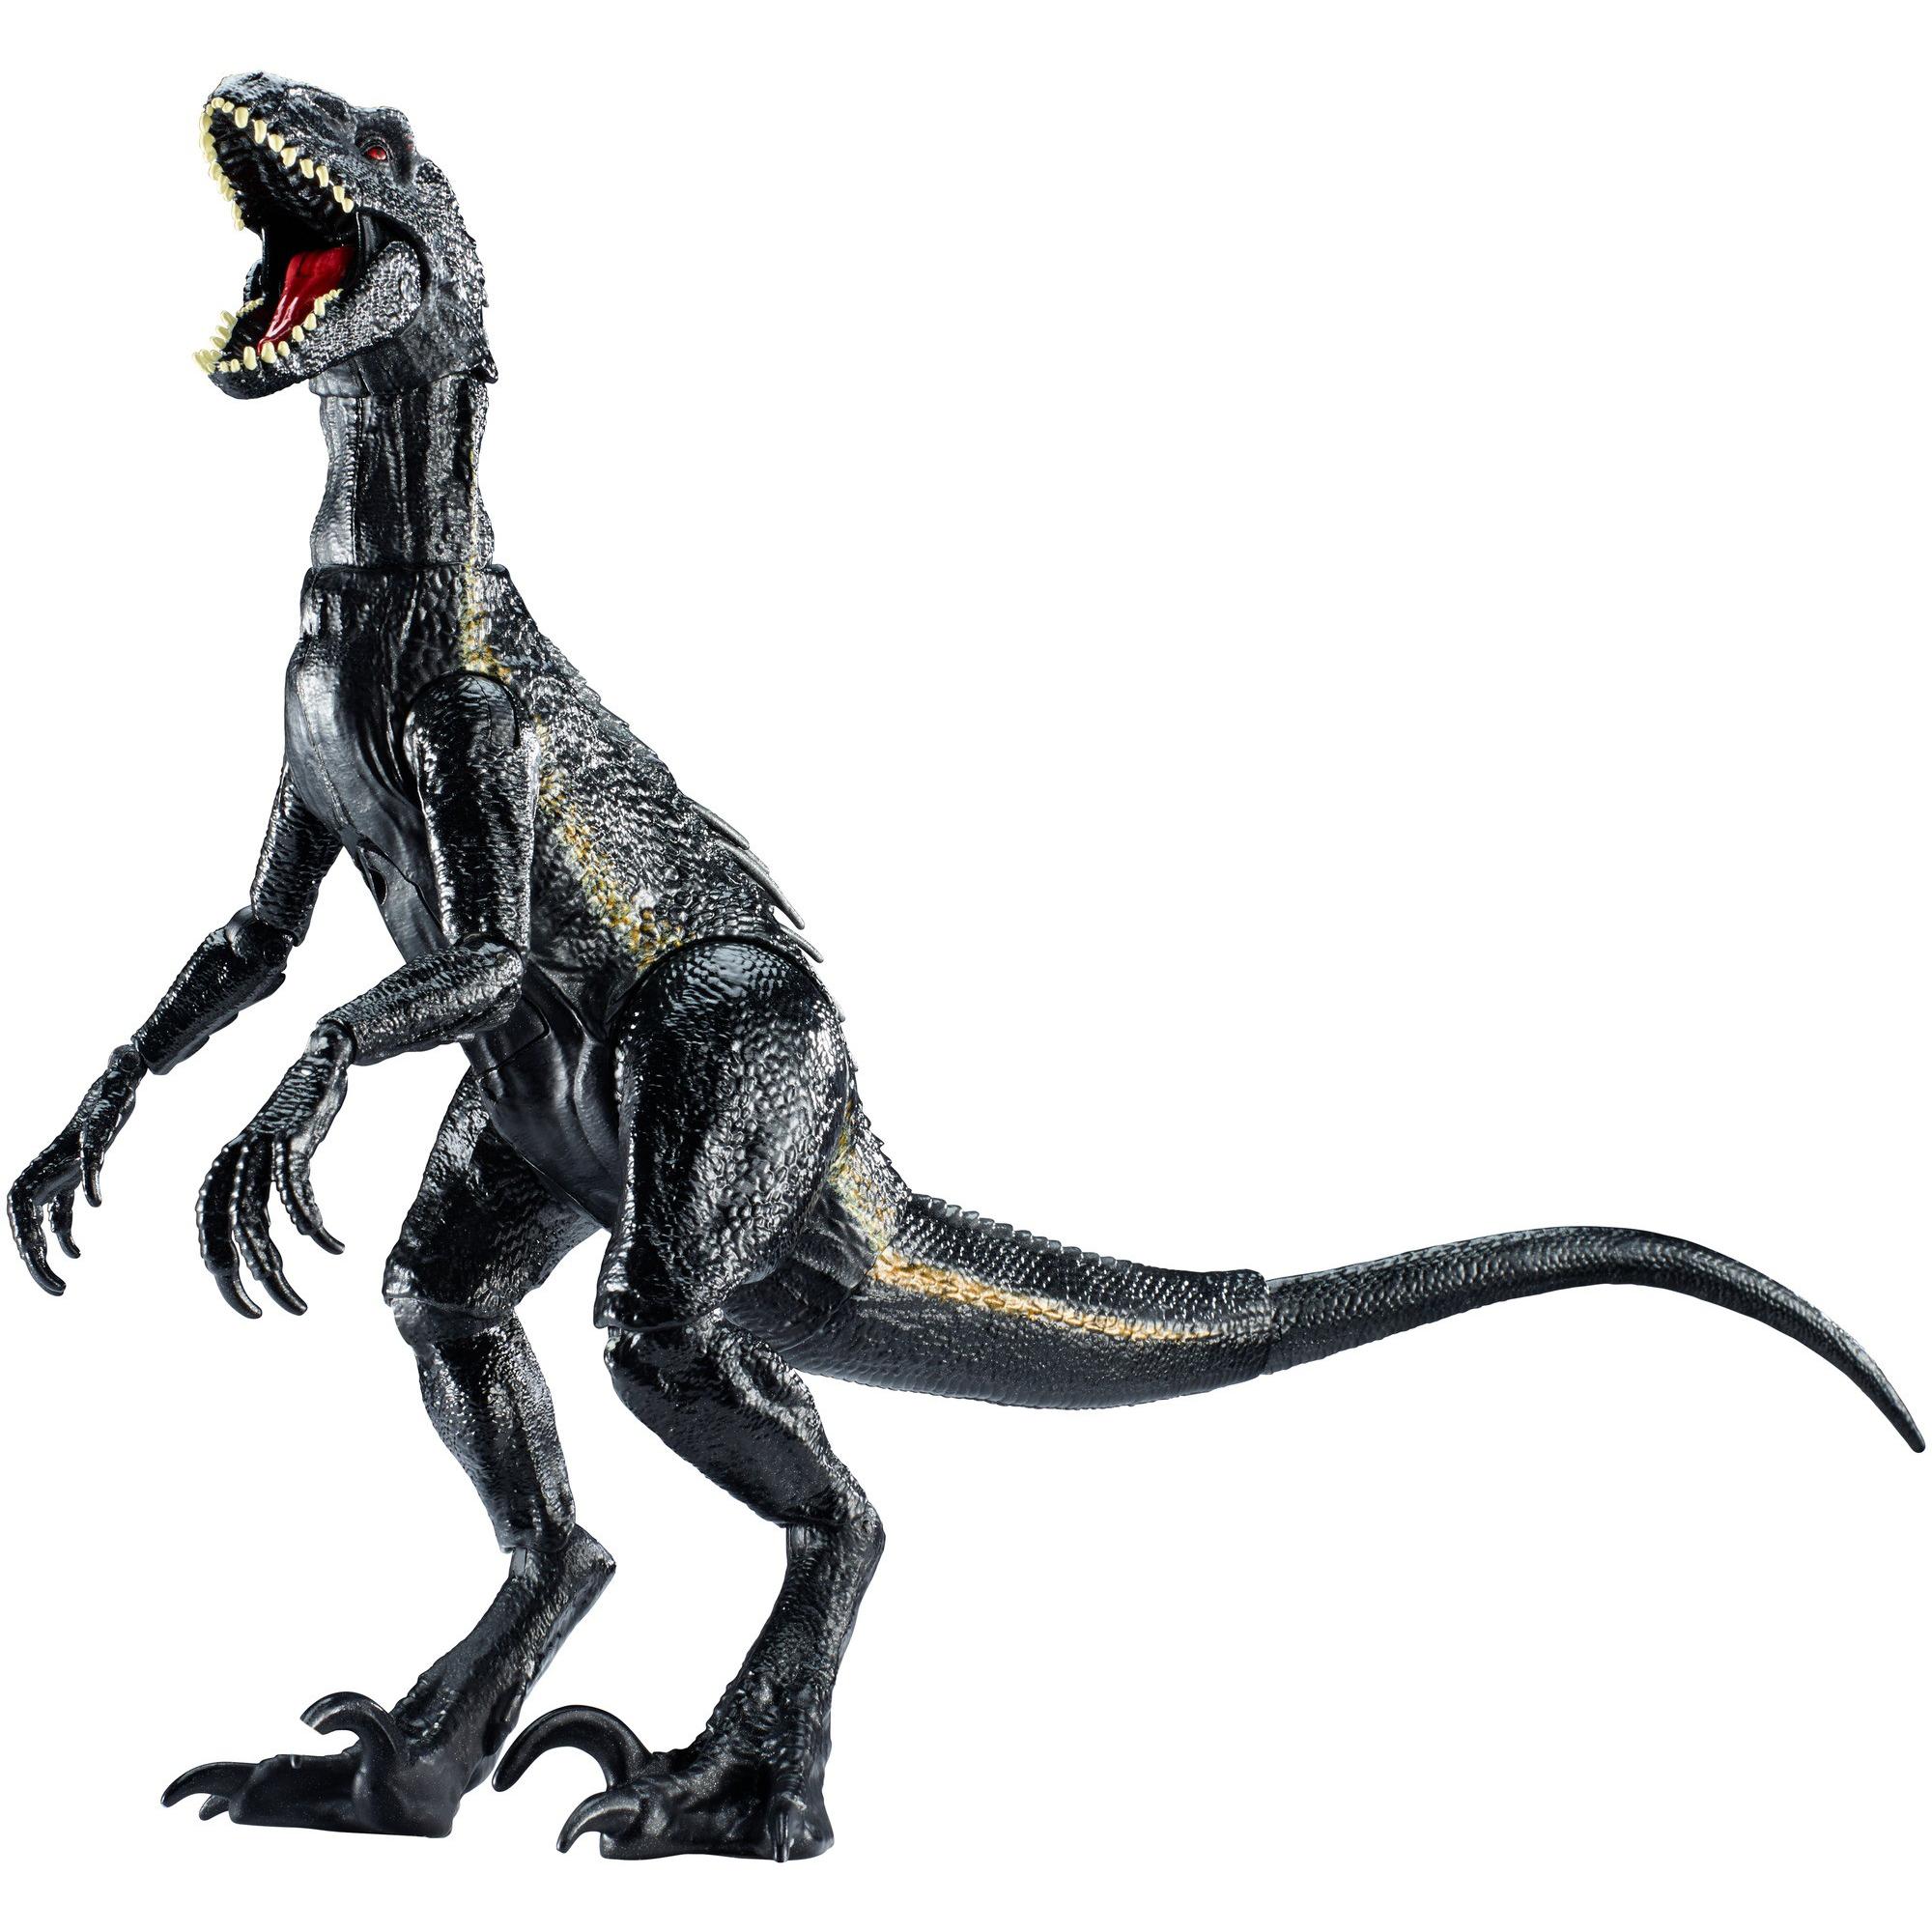 Jurassic World: Fallen Kingdom Indoraptor Dinosaur Action Figure with Movable Joints, Toy Gift ​ - image 1 of 6